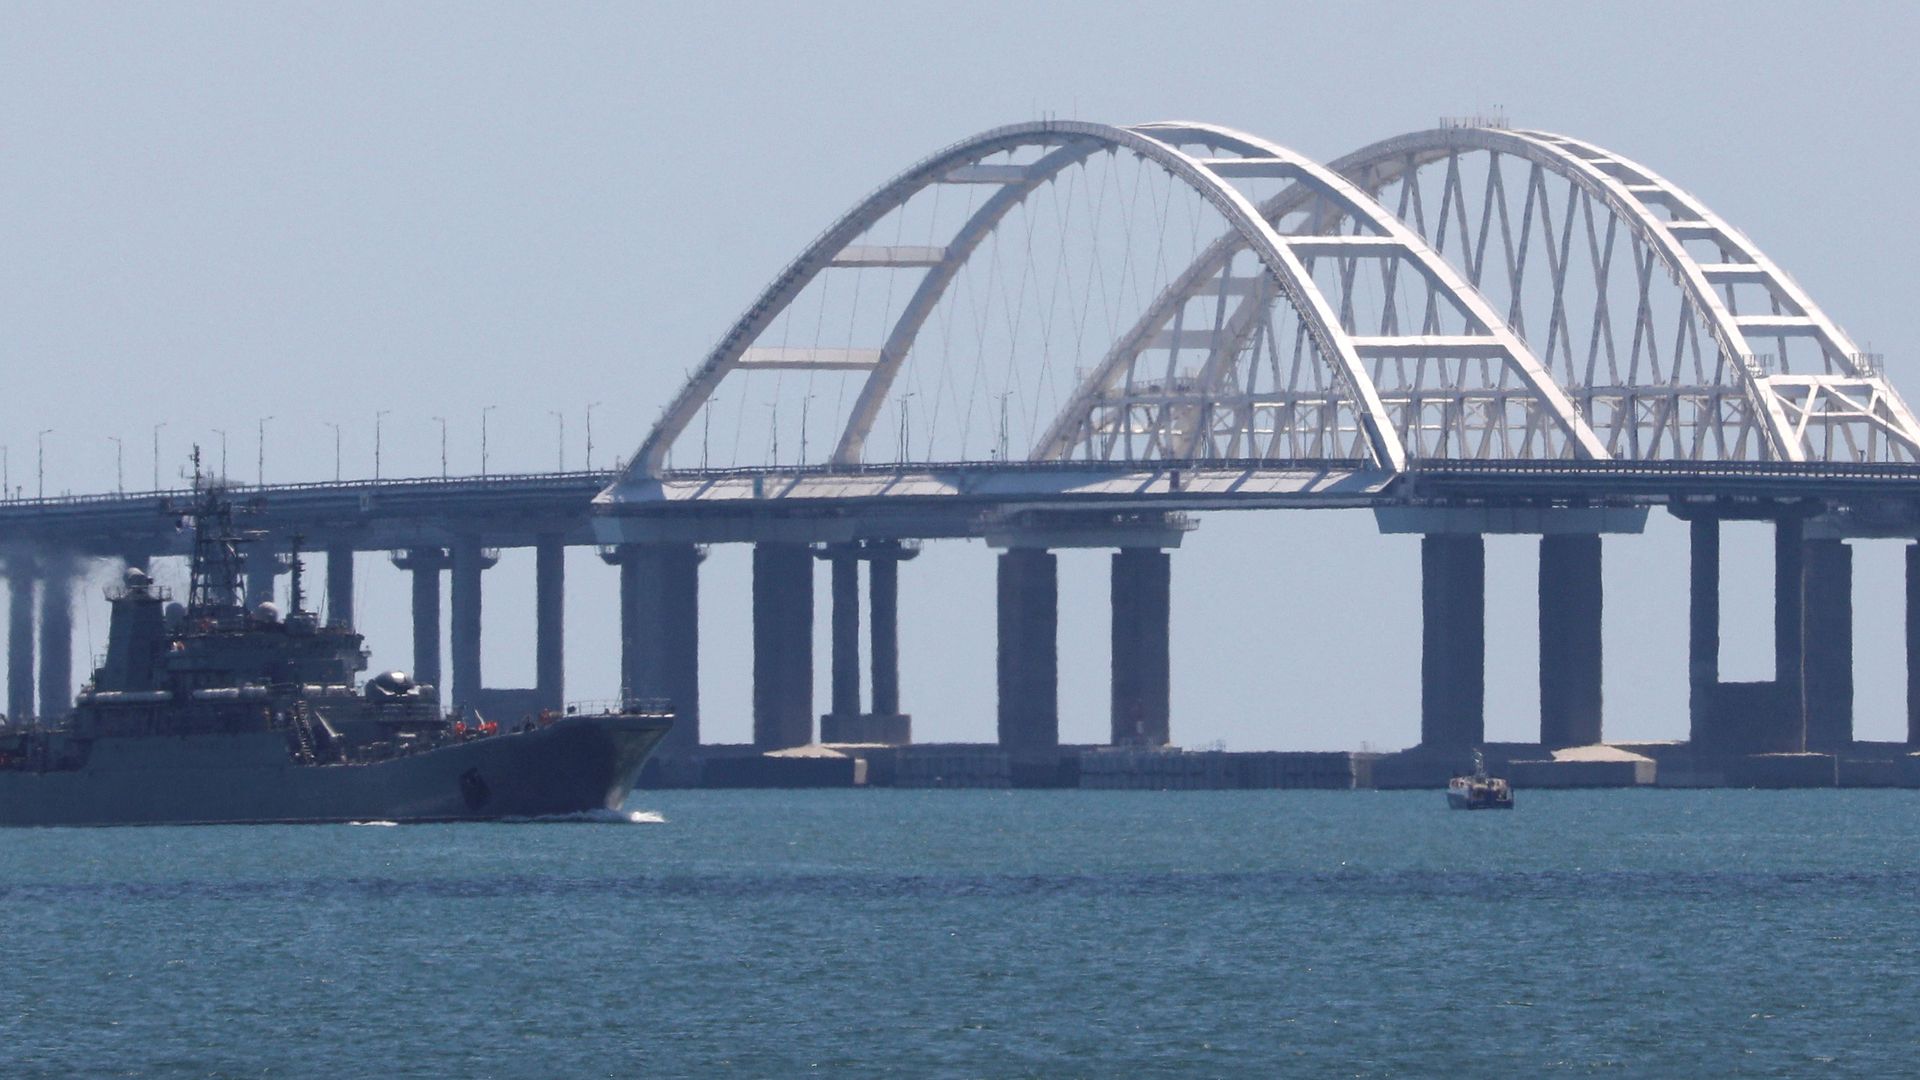 Without the Kerch Bridge, a main artery connecting Russia to Crimea, many wonder how Russia will get its military supplies into Ukraine.